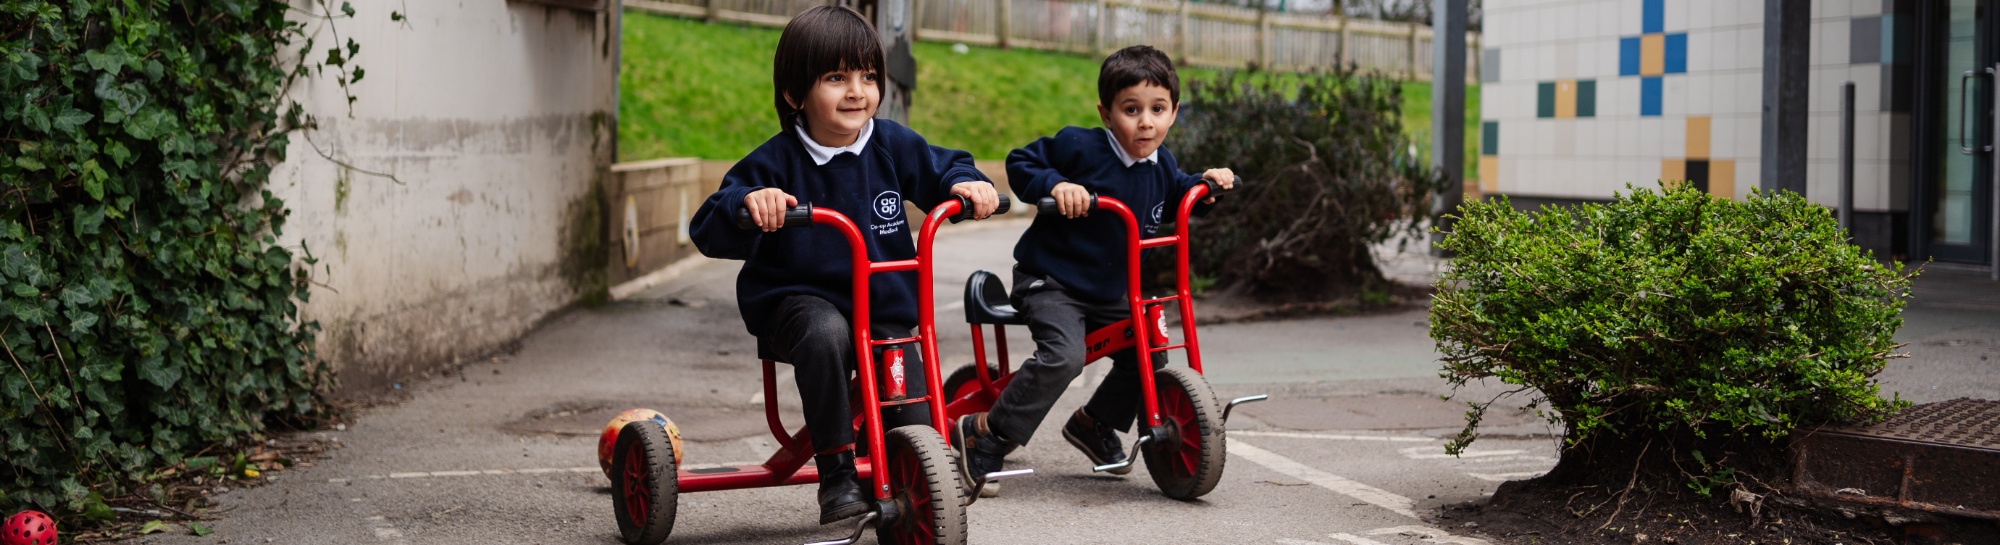 Header image showing children on tricycles